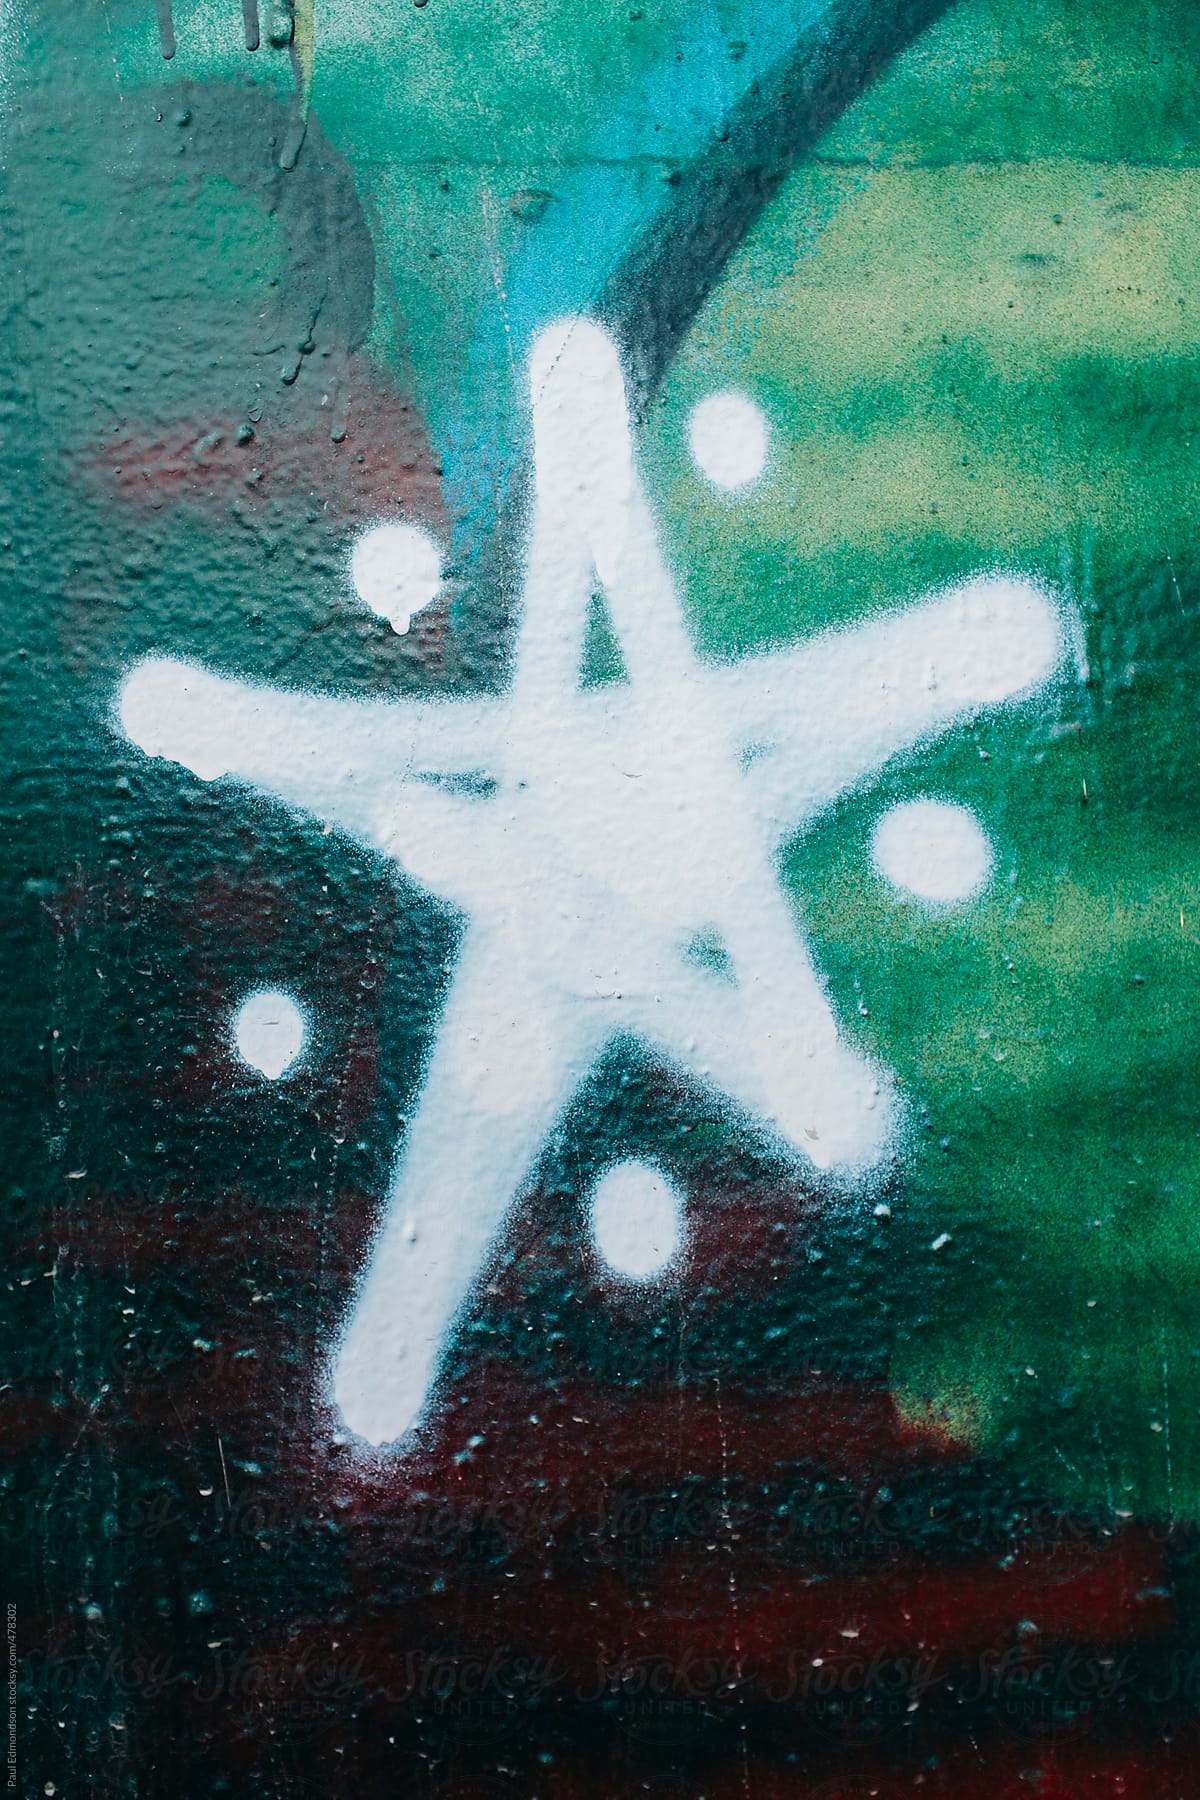 Star symbol spray painted on building wall, close up